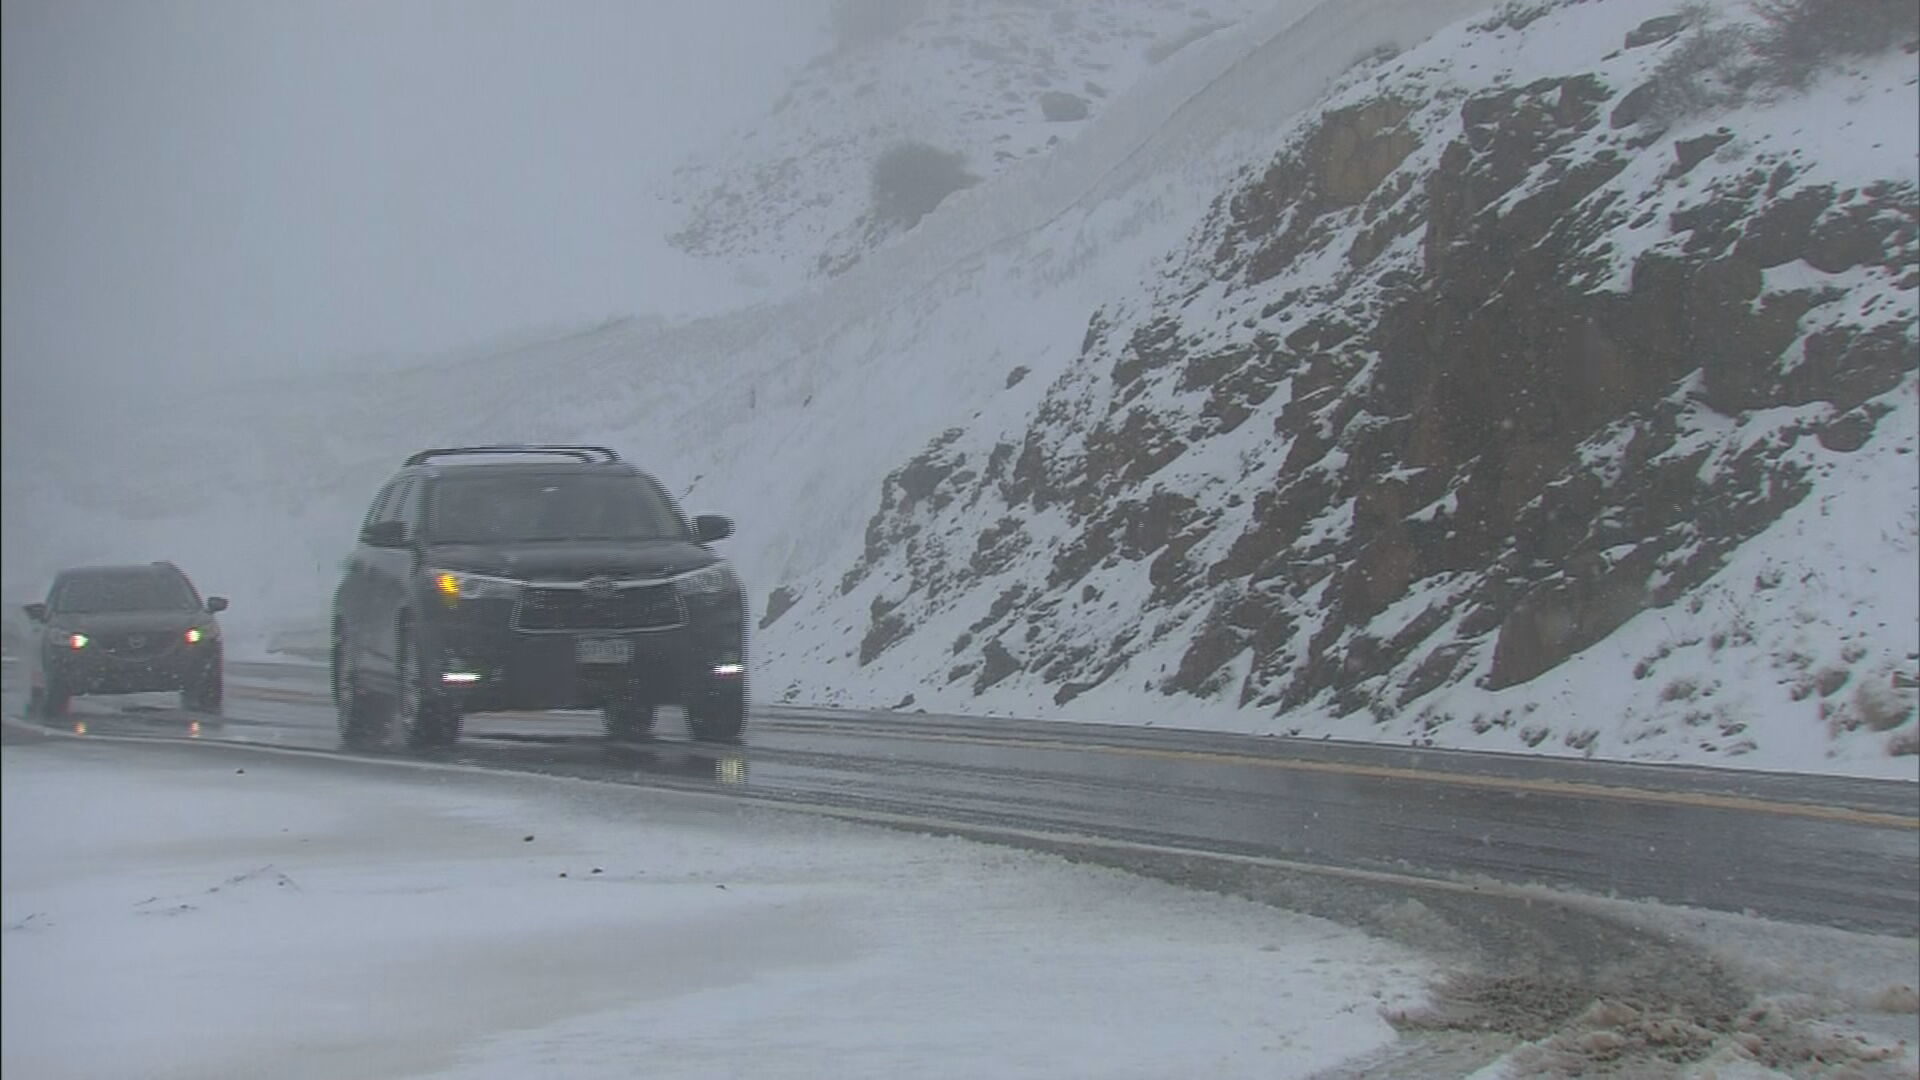 Denver Snow Takes Some By Surprise In Colorado's Foothills & High Country